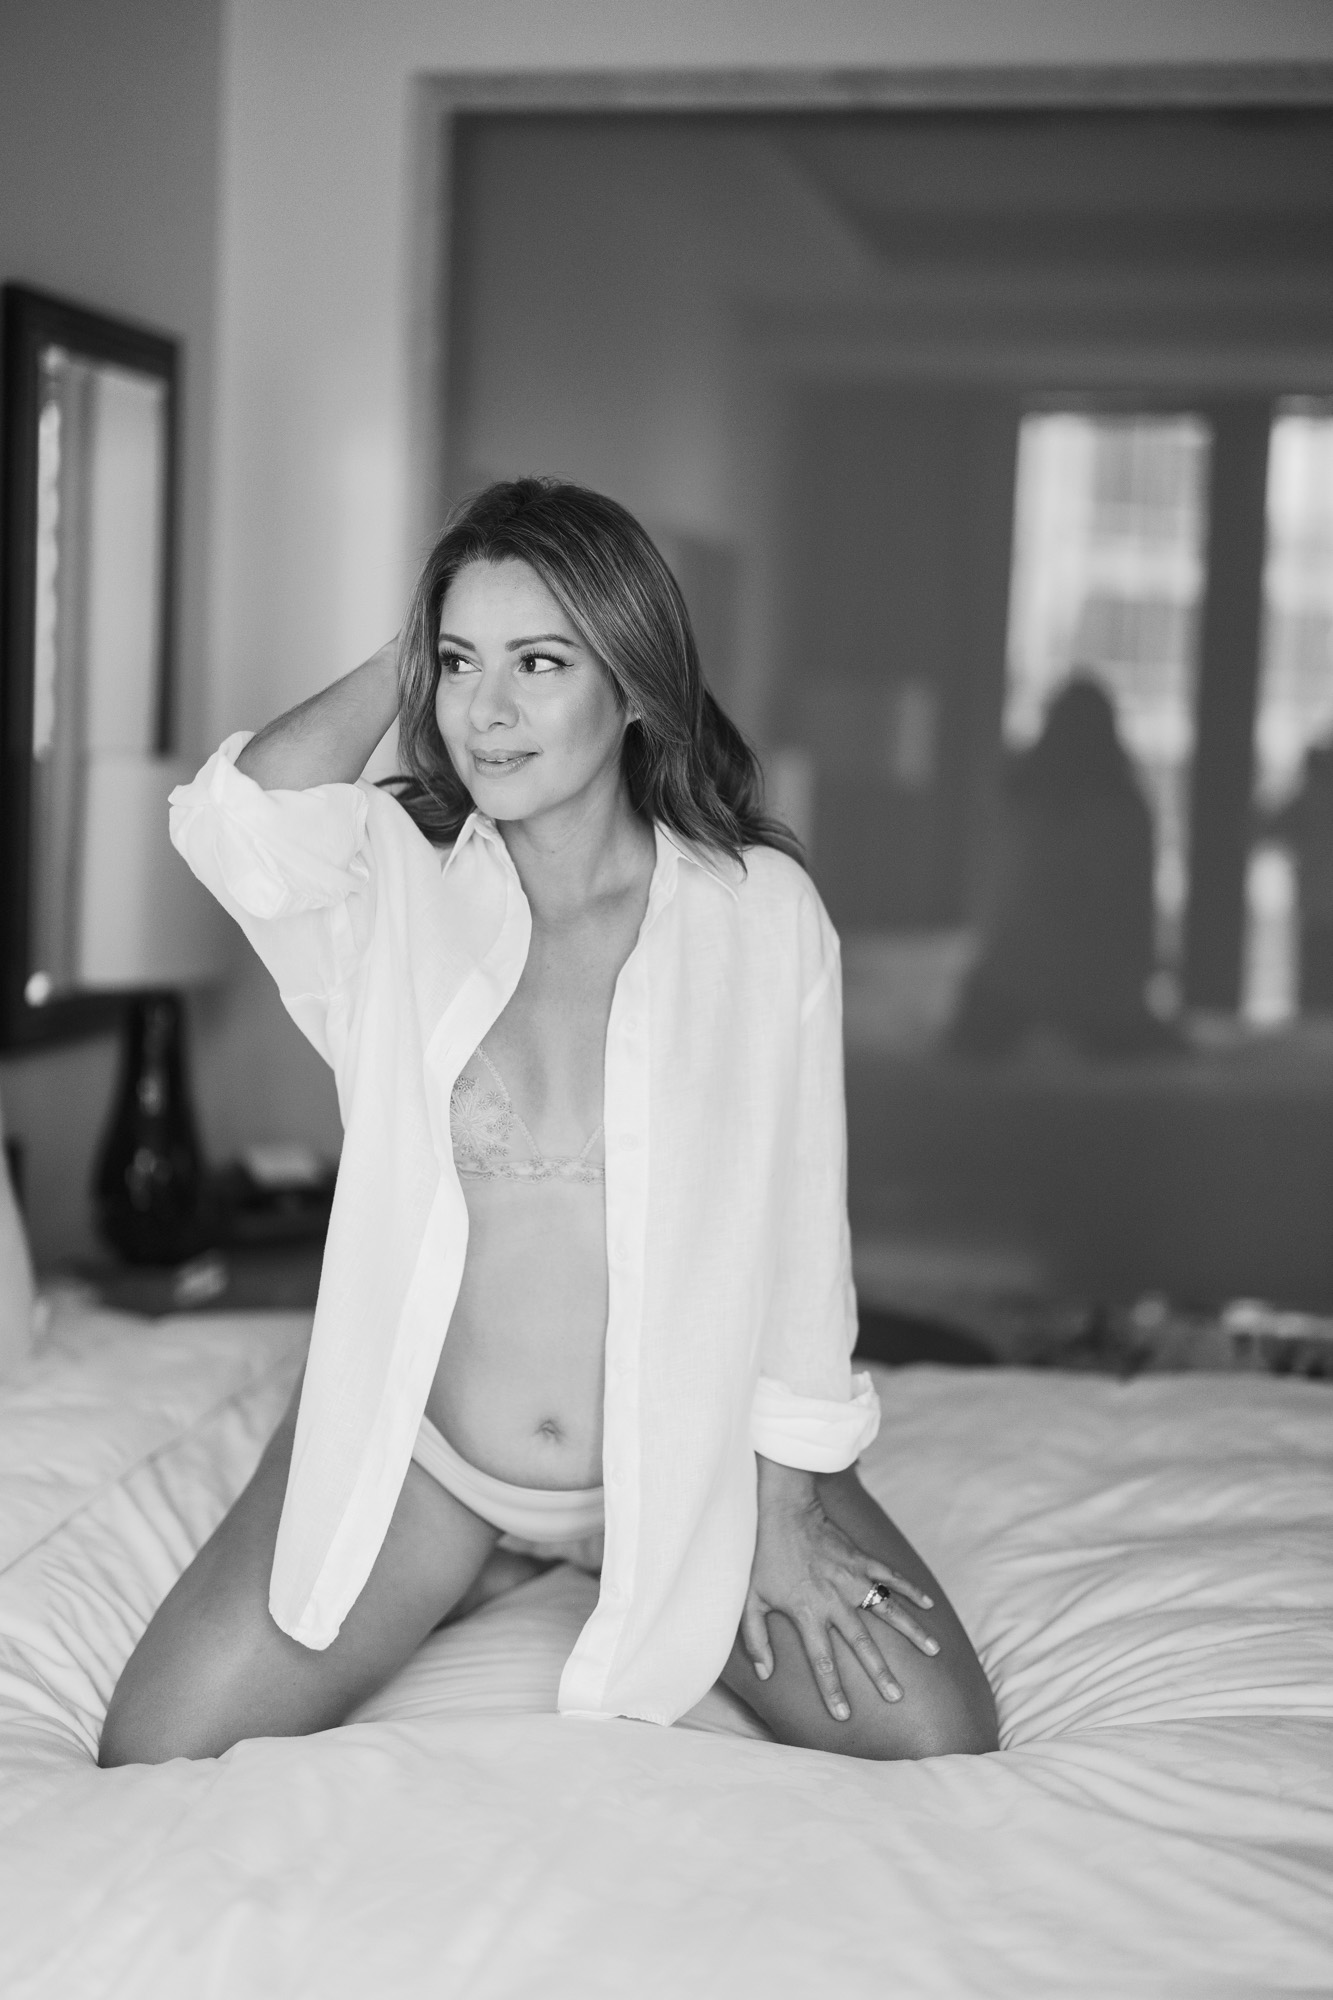 A black and white boudoir photo at the Langham Hotel in Chicago.